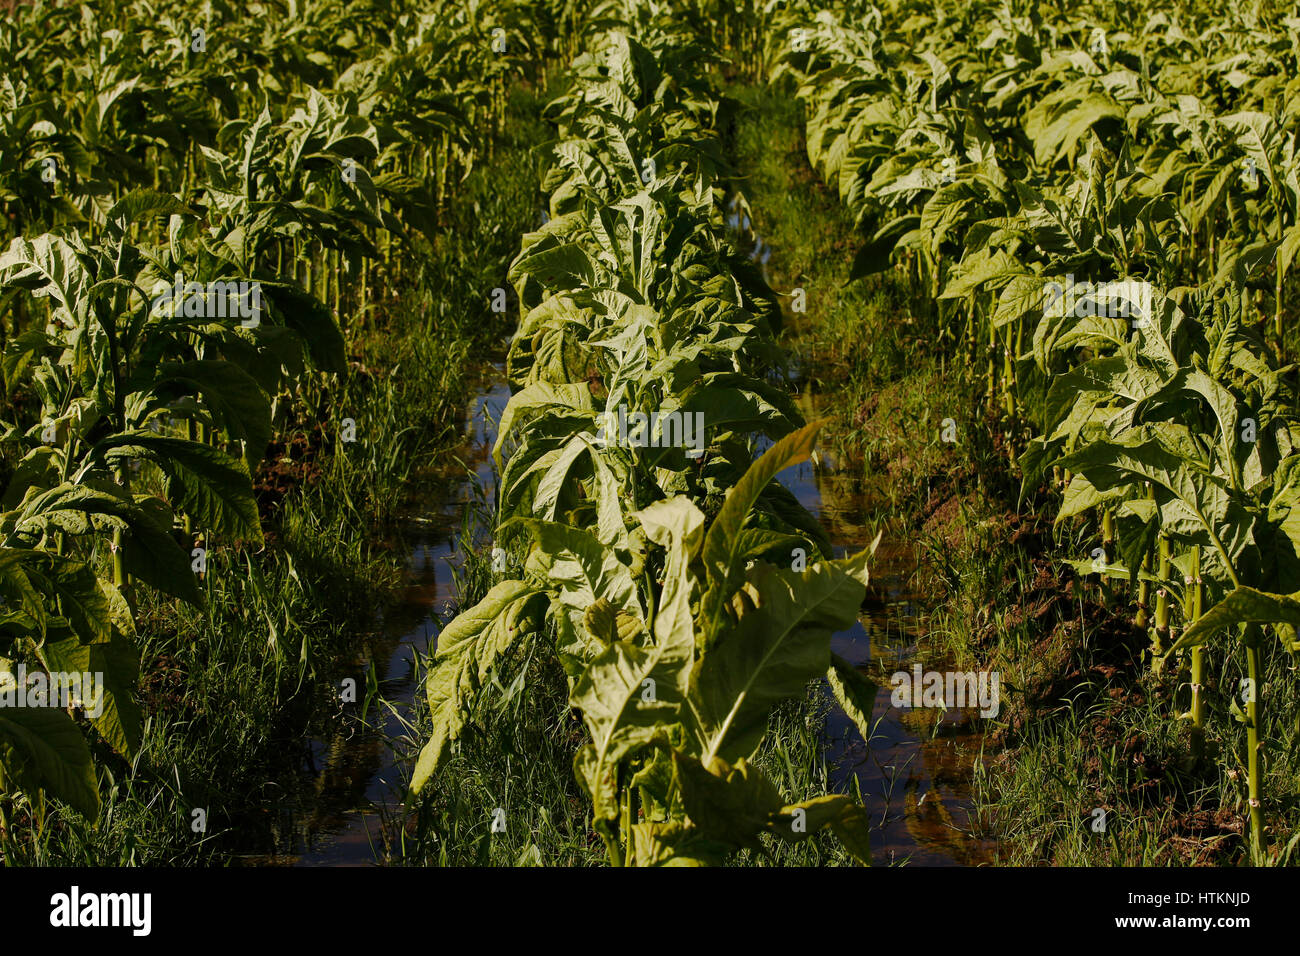 Tobacco plants are pictured in a field, during the tobacco harvest at Dion Tou village, near Shaxi in Yunnan province, China Wednesday August 17, 2016 Stock Photo